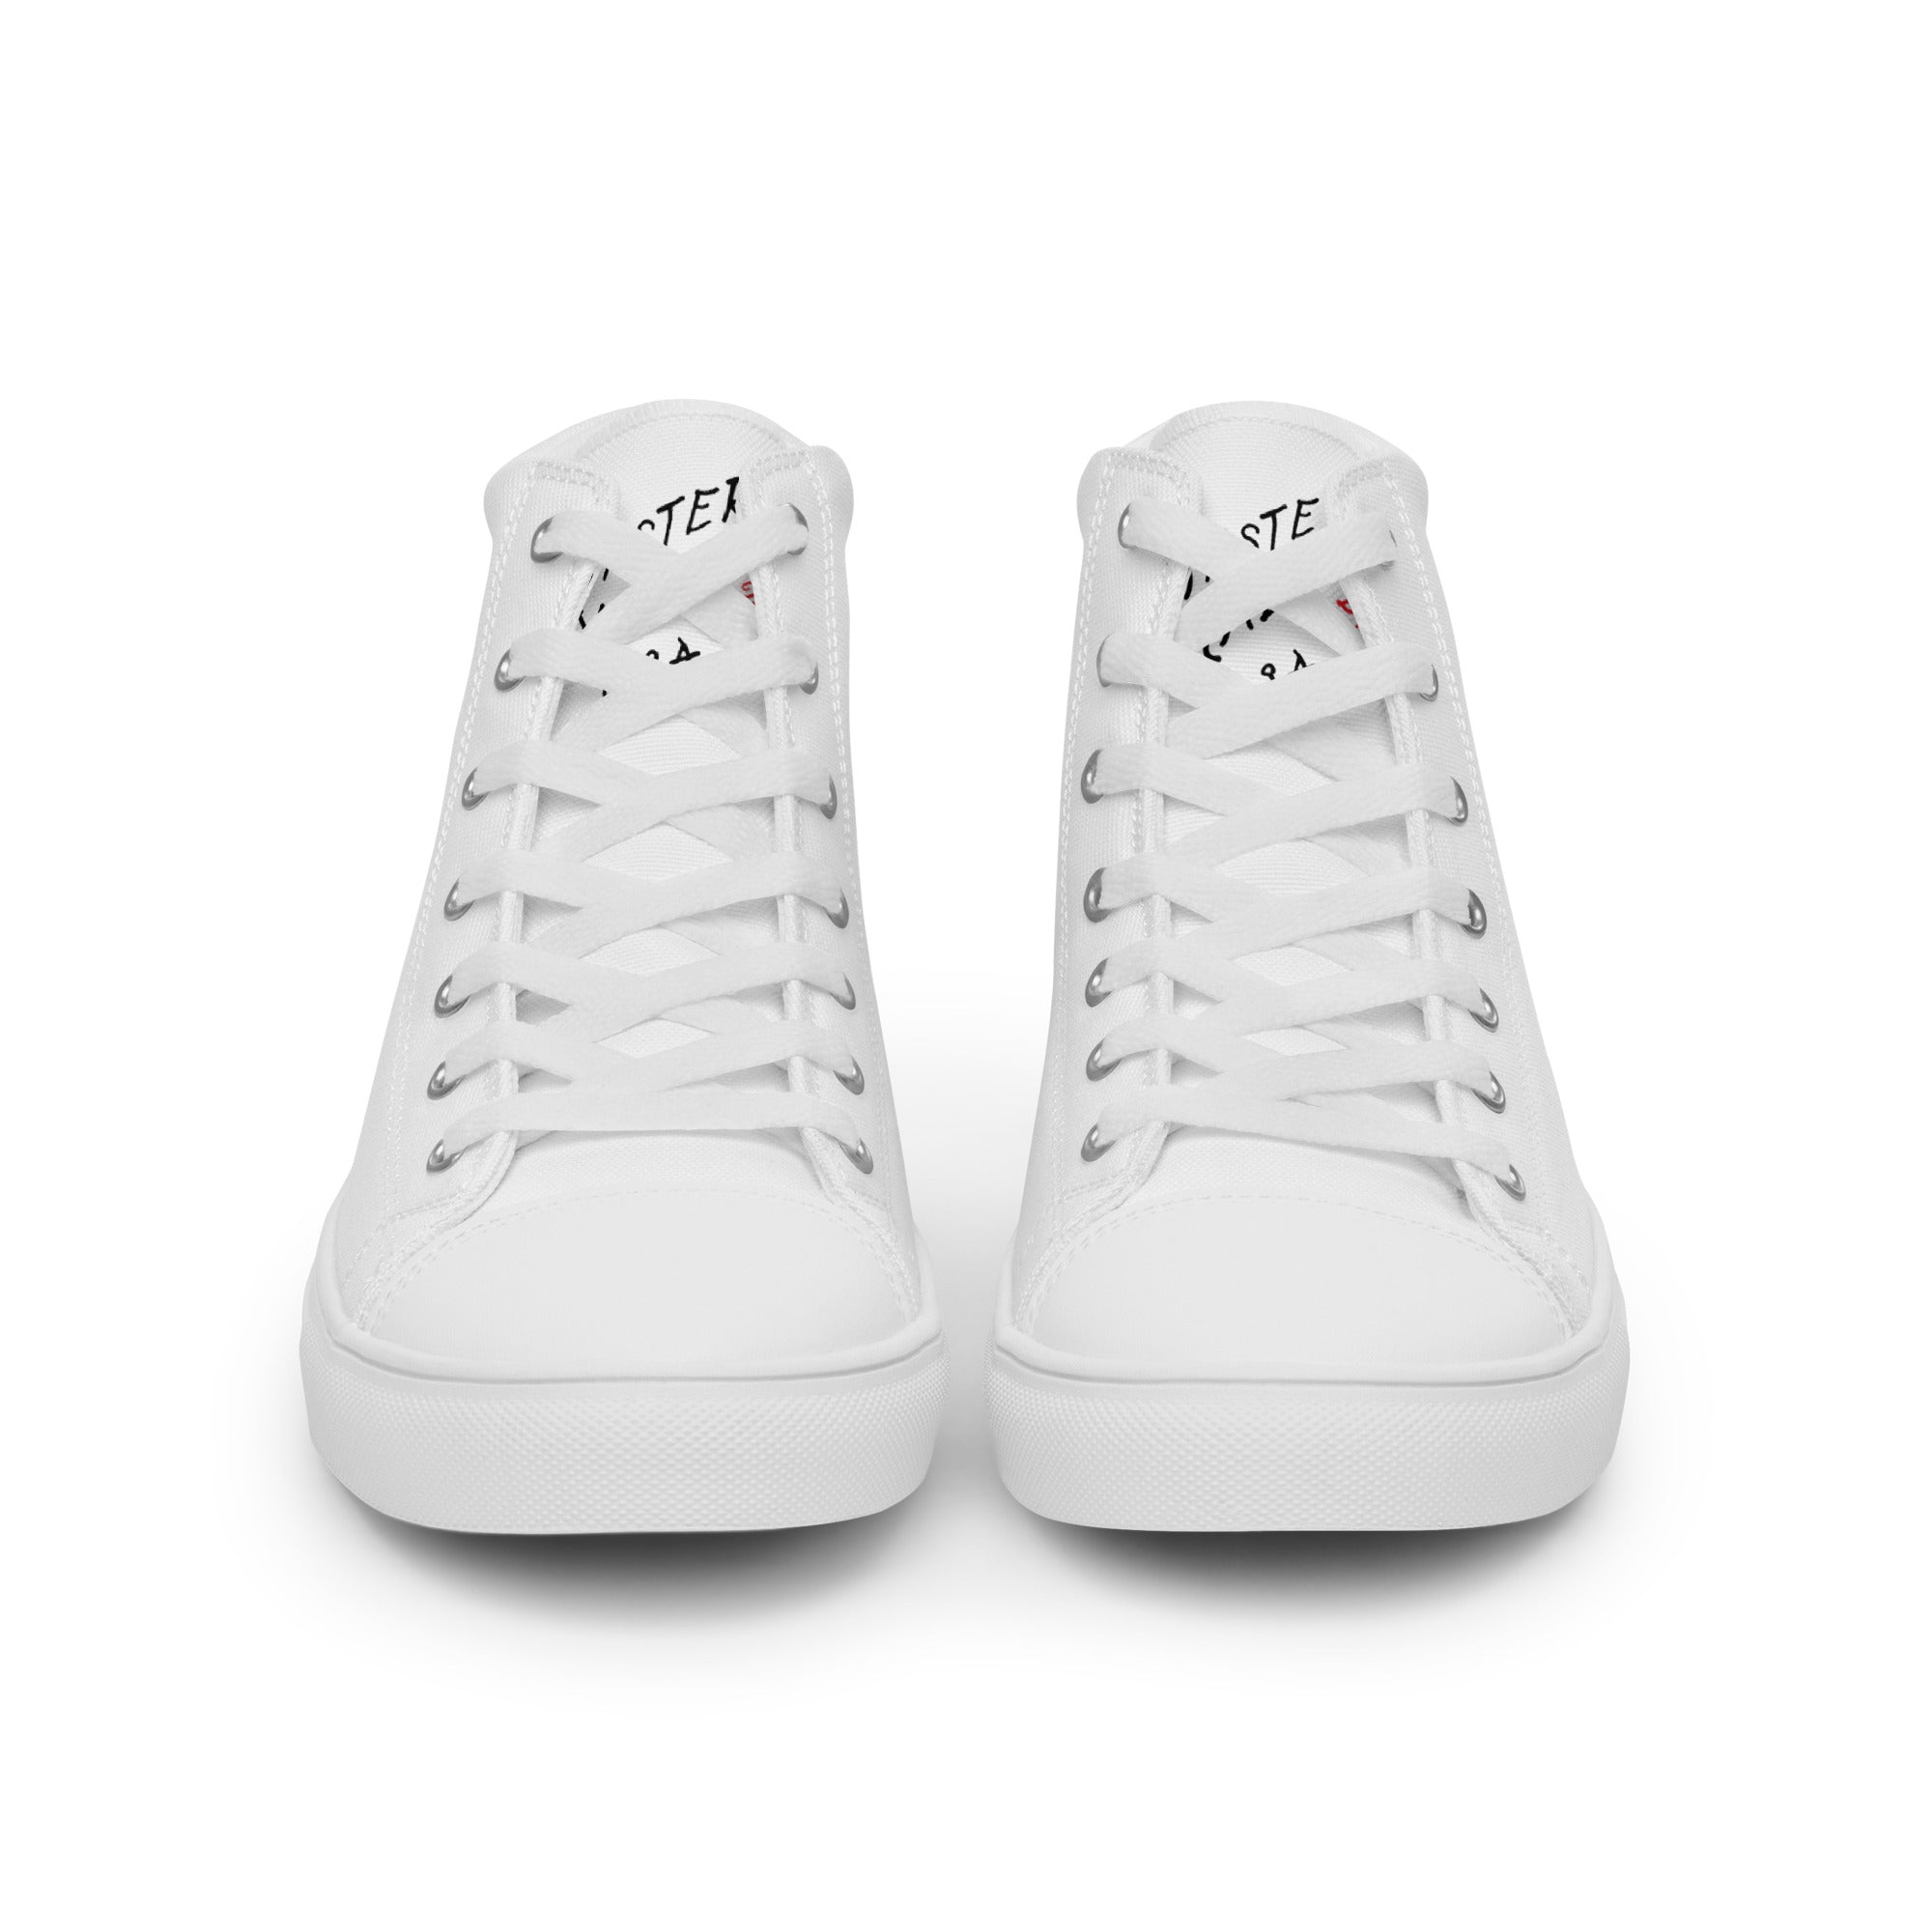 Top 11 Men's White Canvas Shoes (Reviewed for 2023)